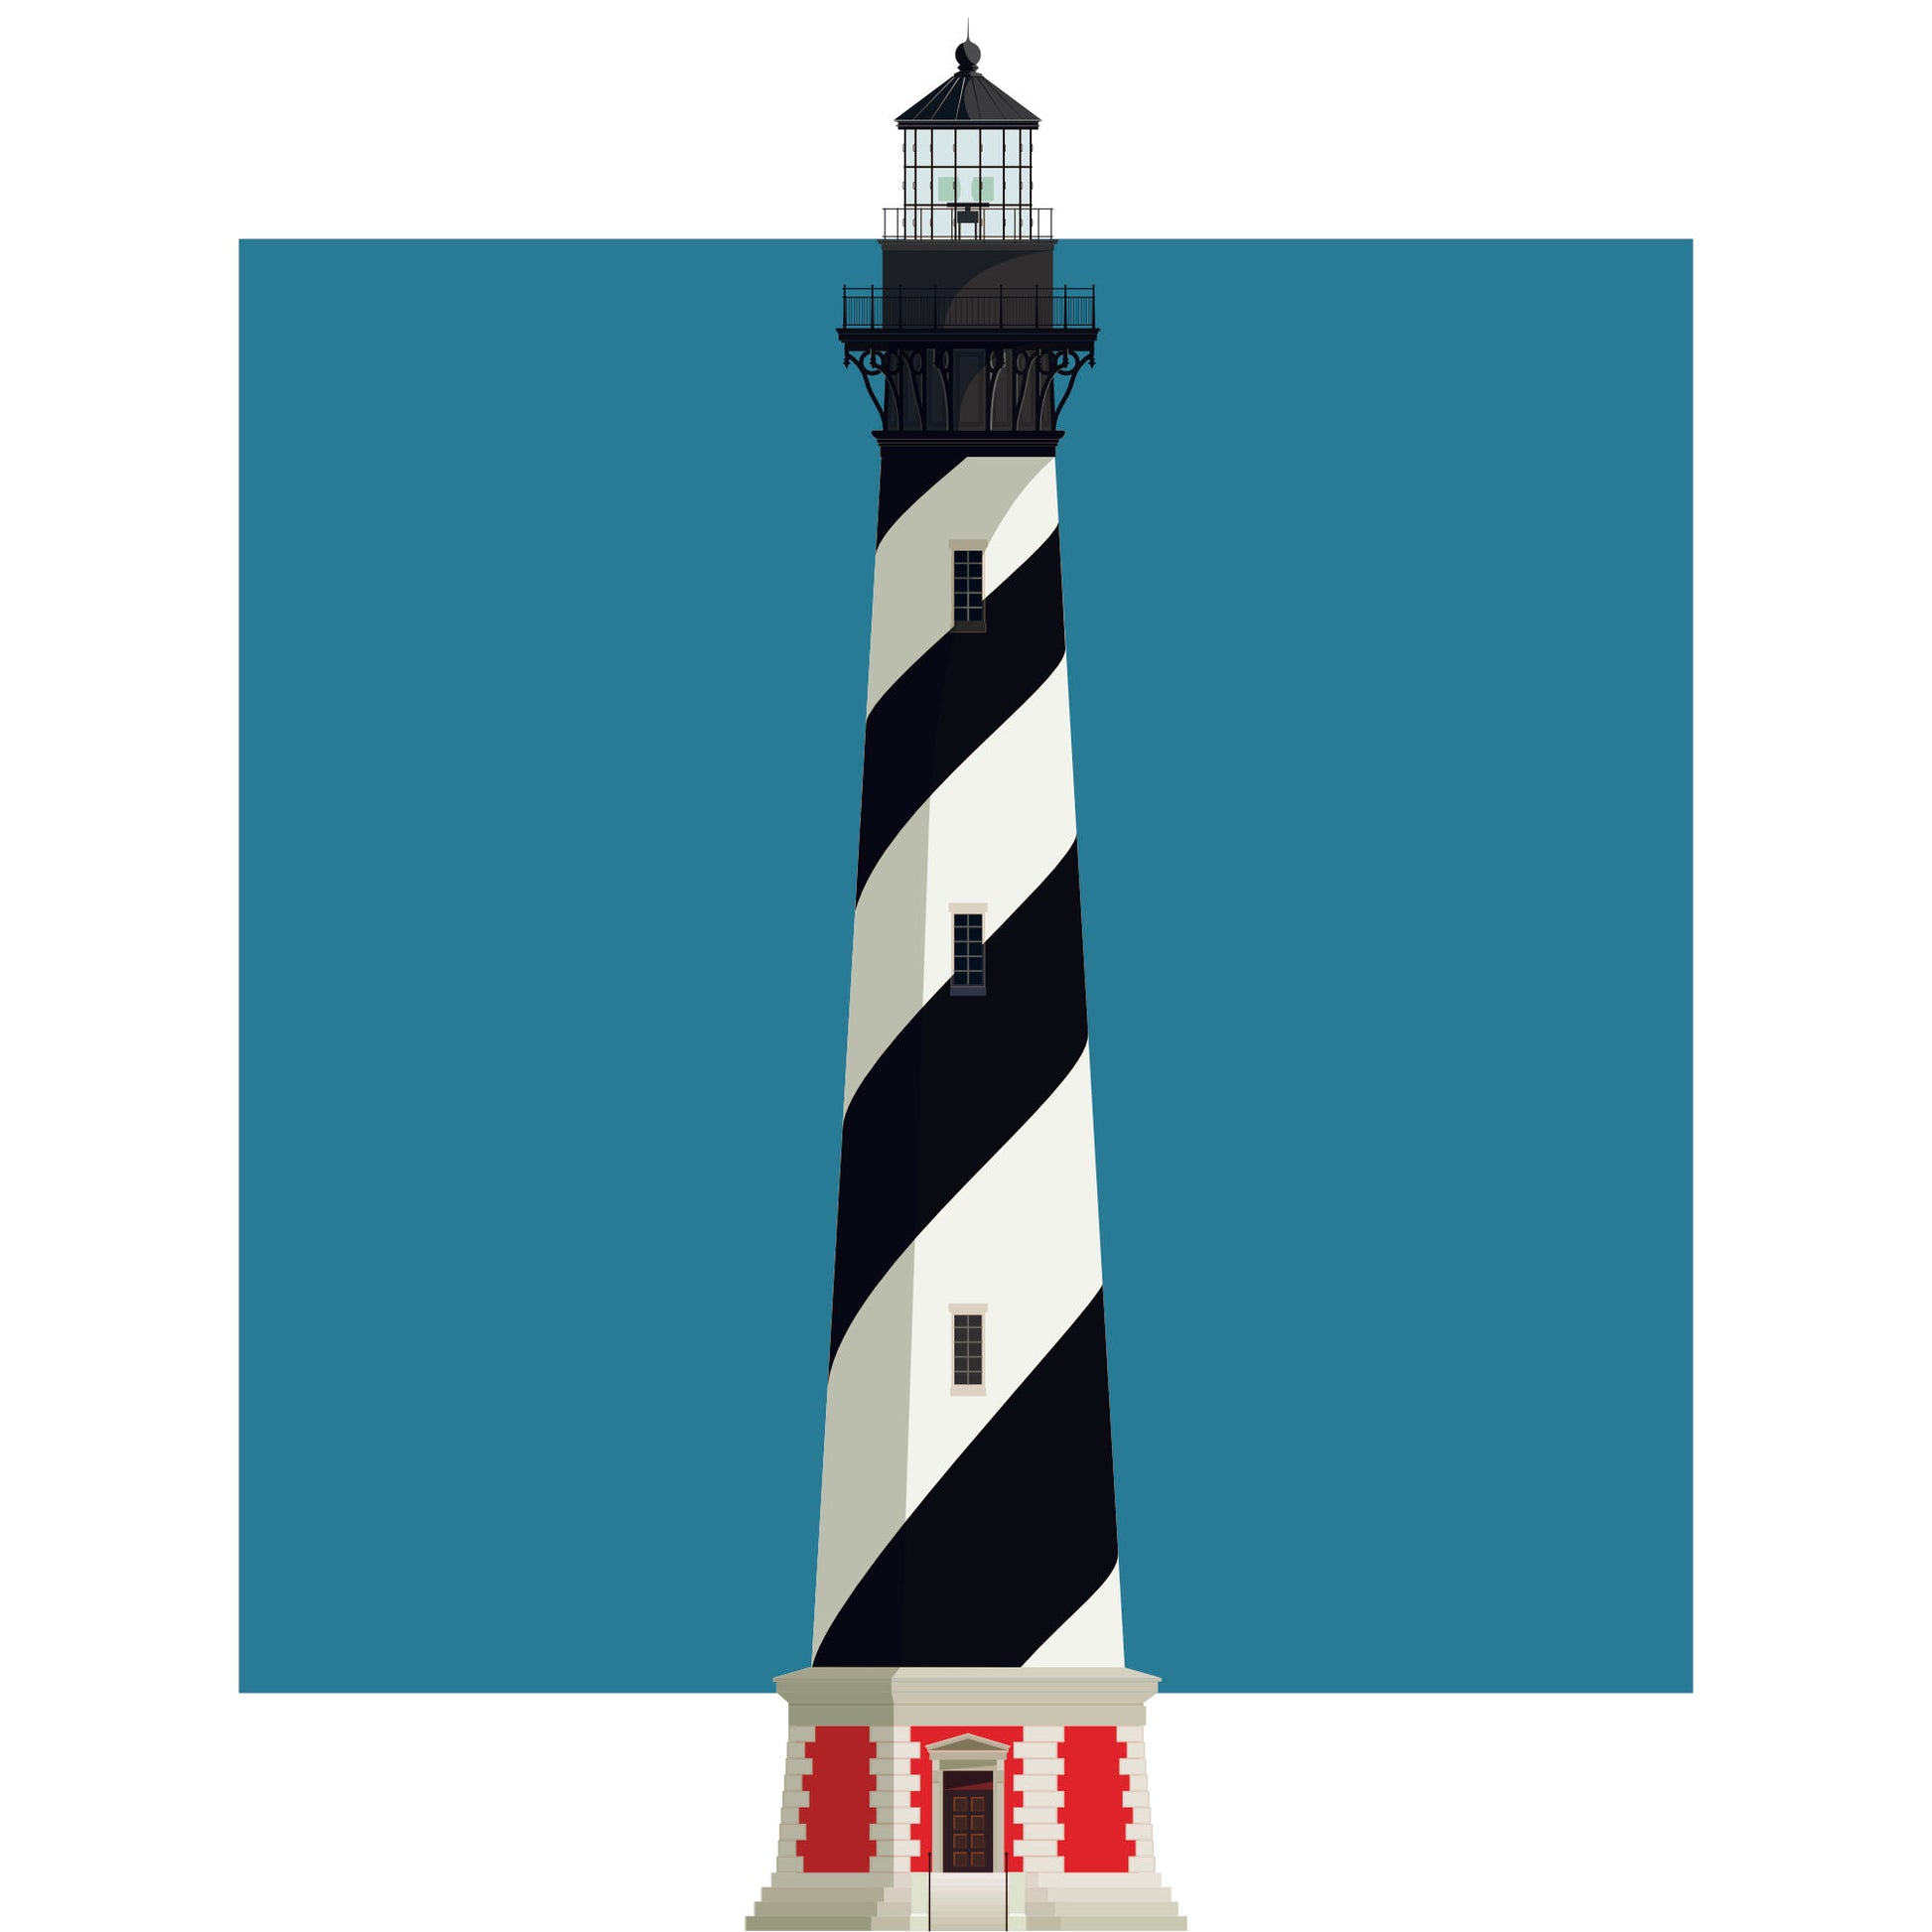 Illustration of the Cape Hatteras lighthouse, North Carolina, USA. On a white background with aqua blue square as a backdrop.